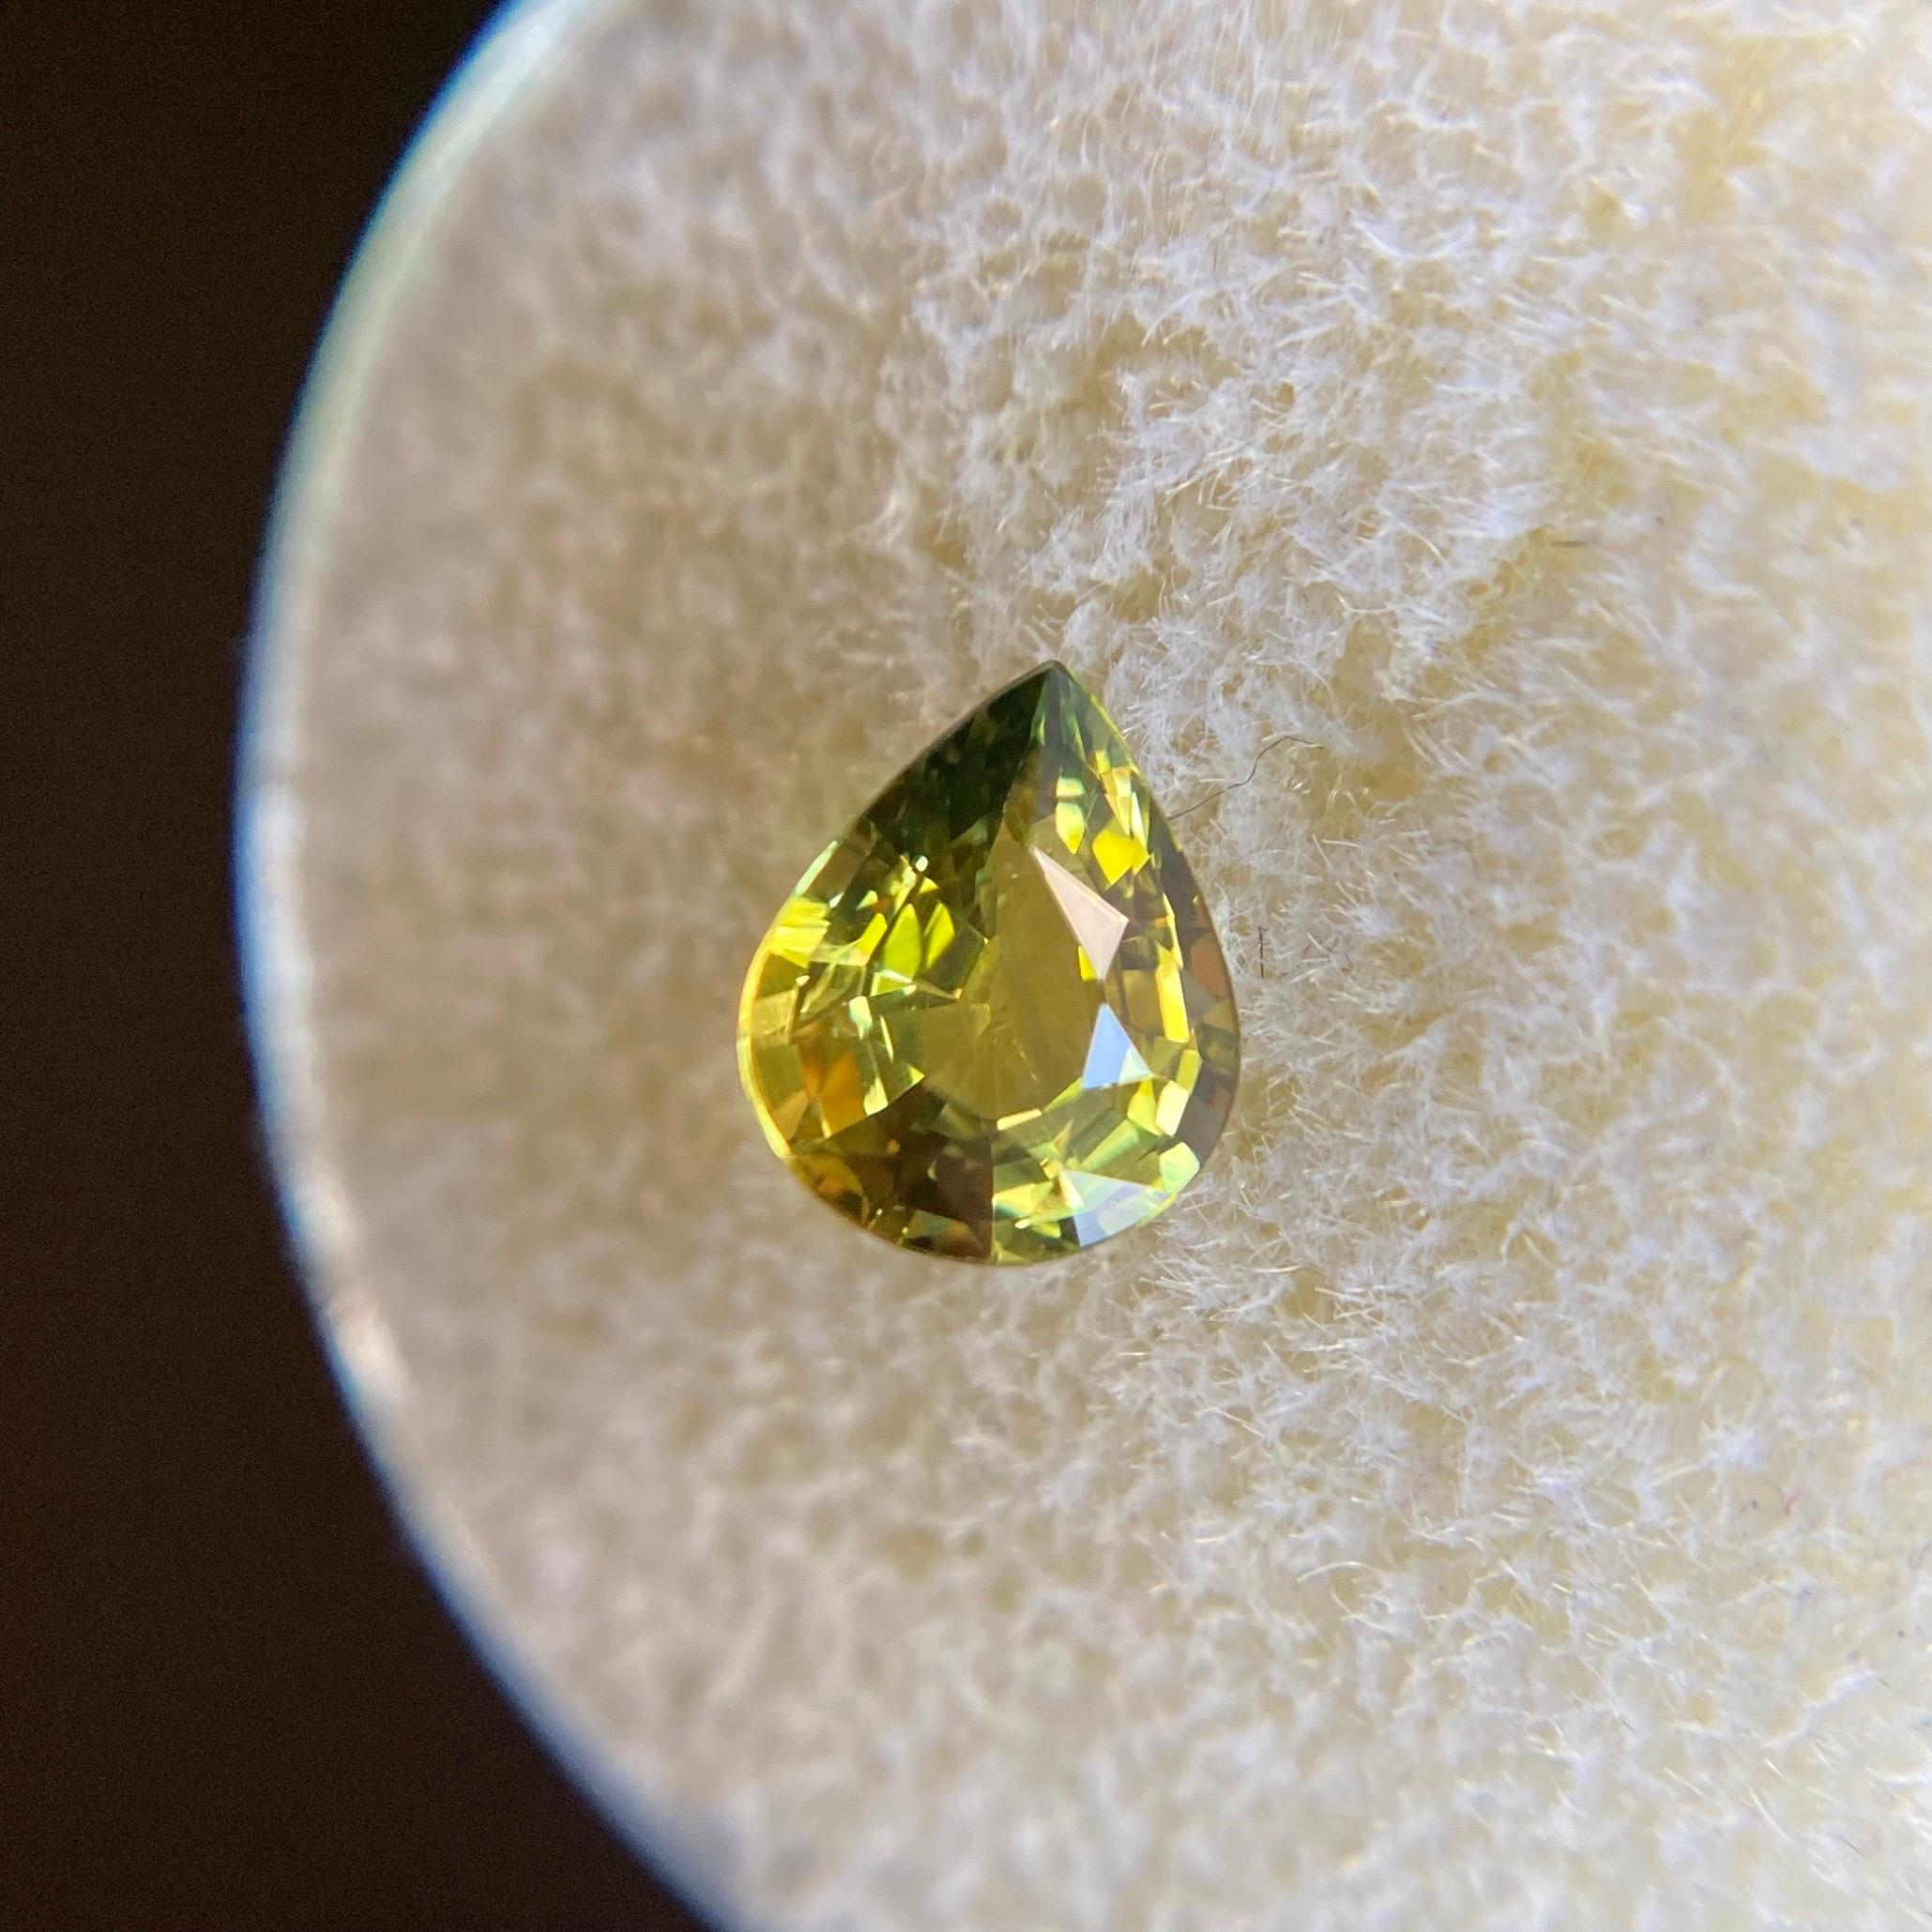 GIA Certified 1.01ct Untreated Vivid Yellow Sapphire Pear Teardrop Cut Gem For Sale 3